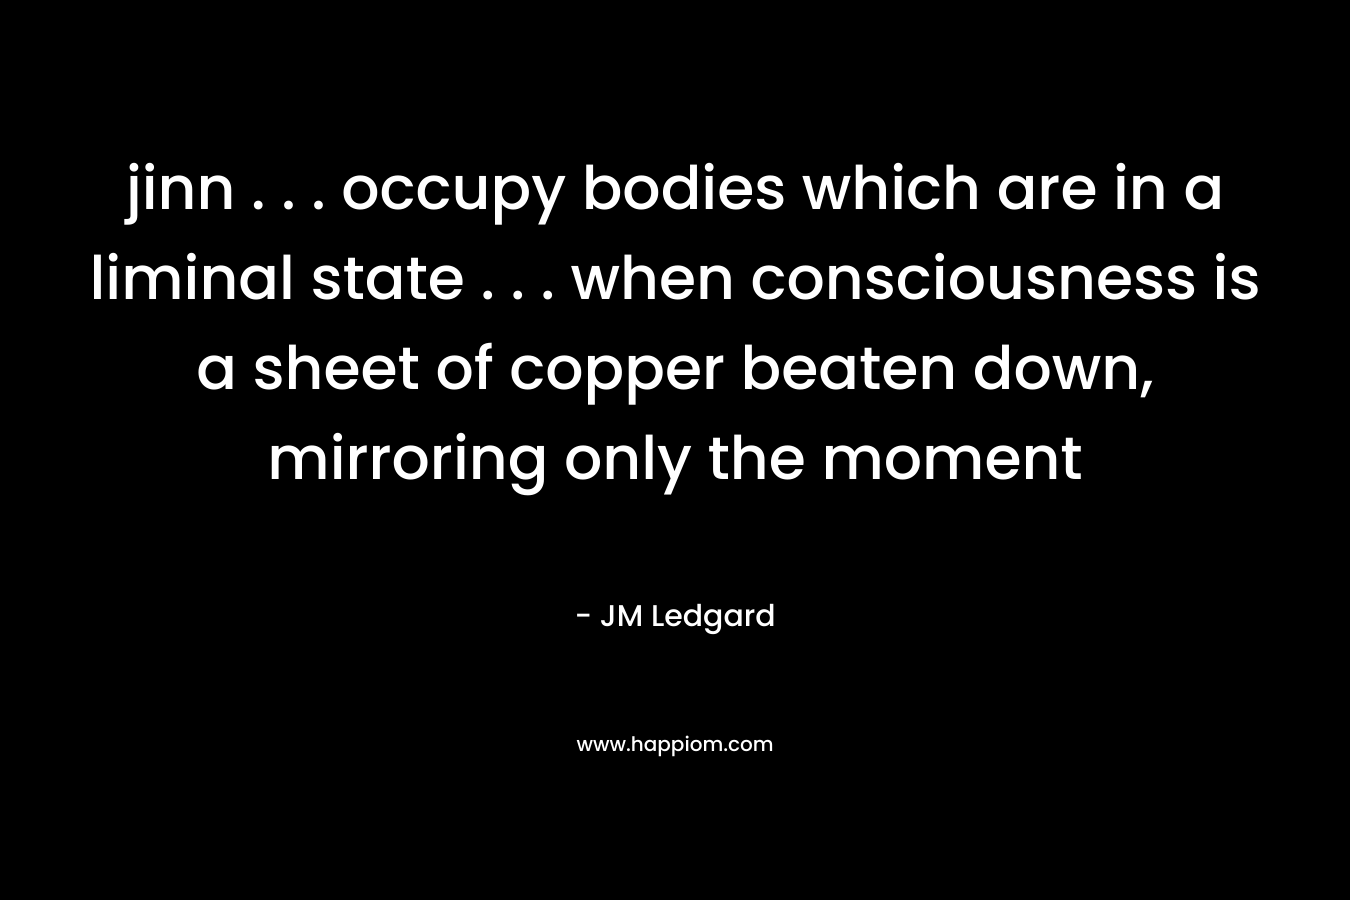 jinn . . . occupy bodies which are in a liminal state . . . when consciousness is a sheet of copper beaten down, mirroring only the moment